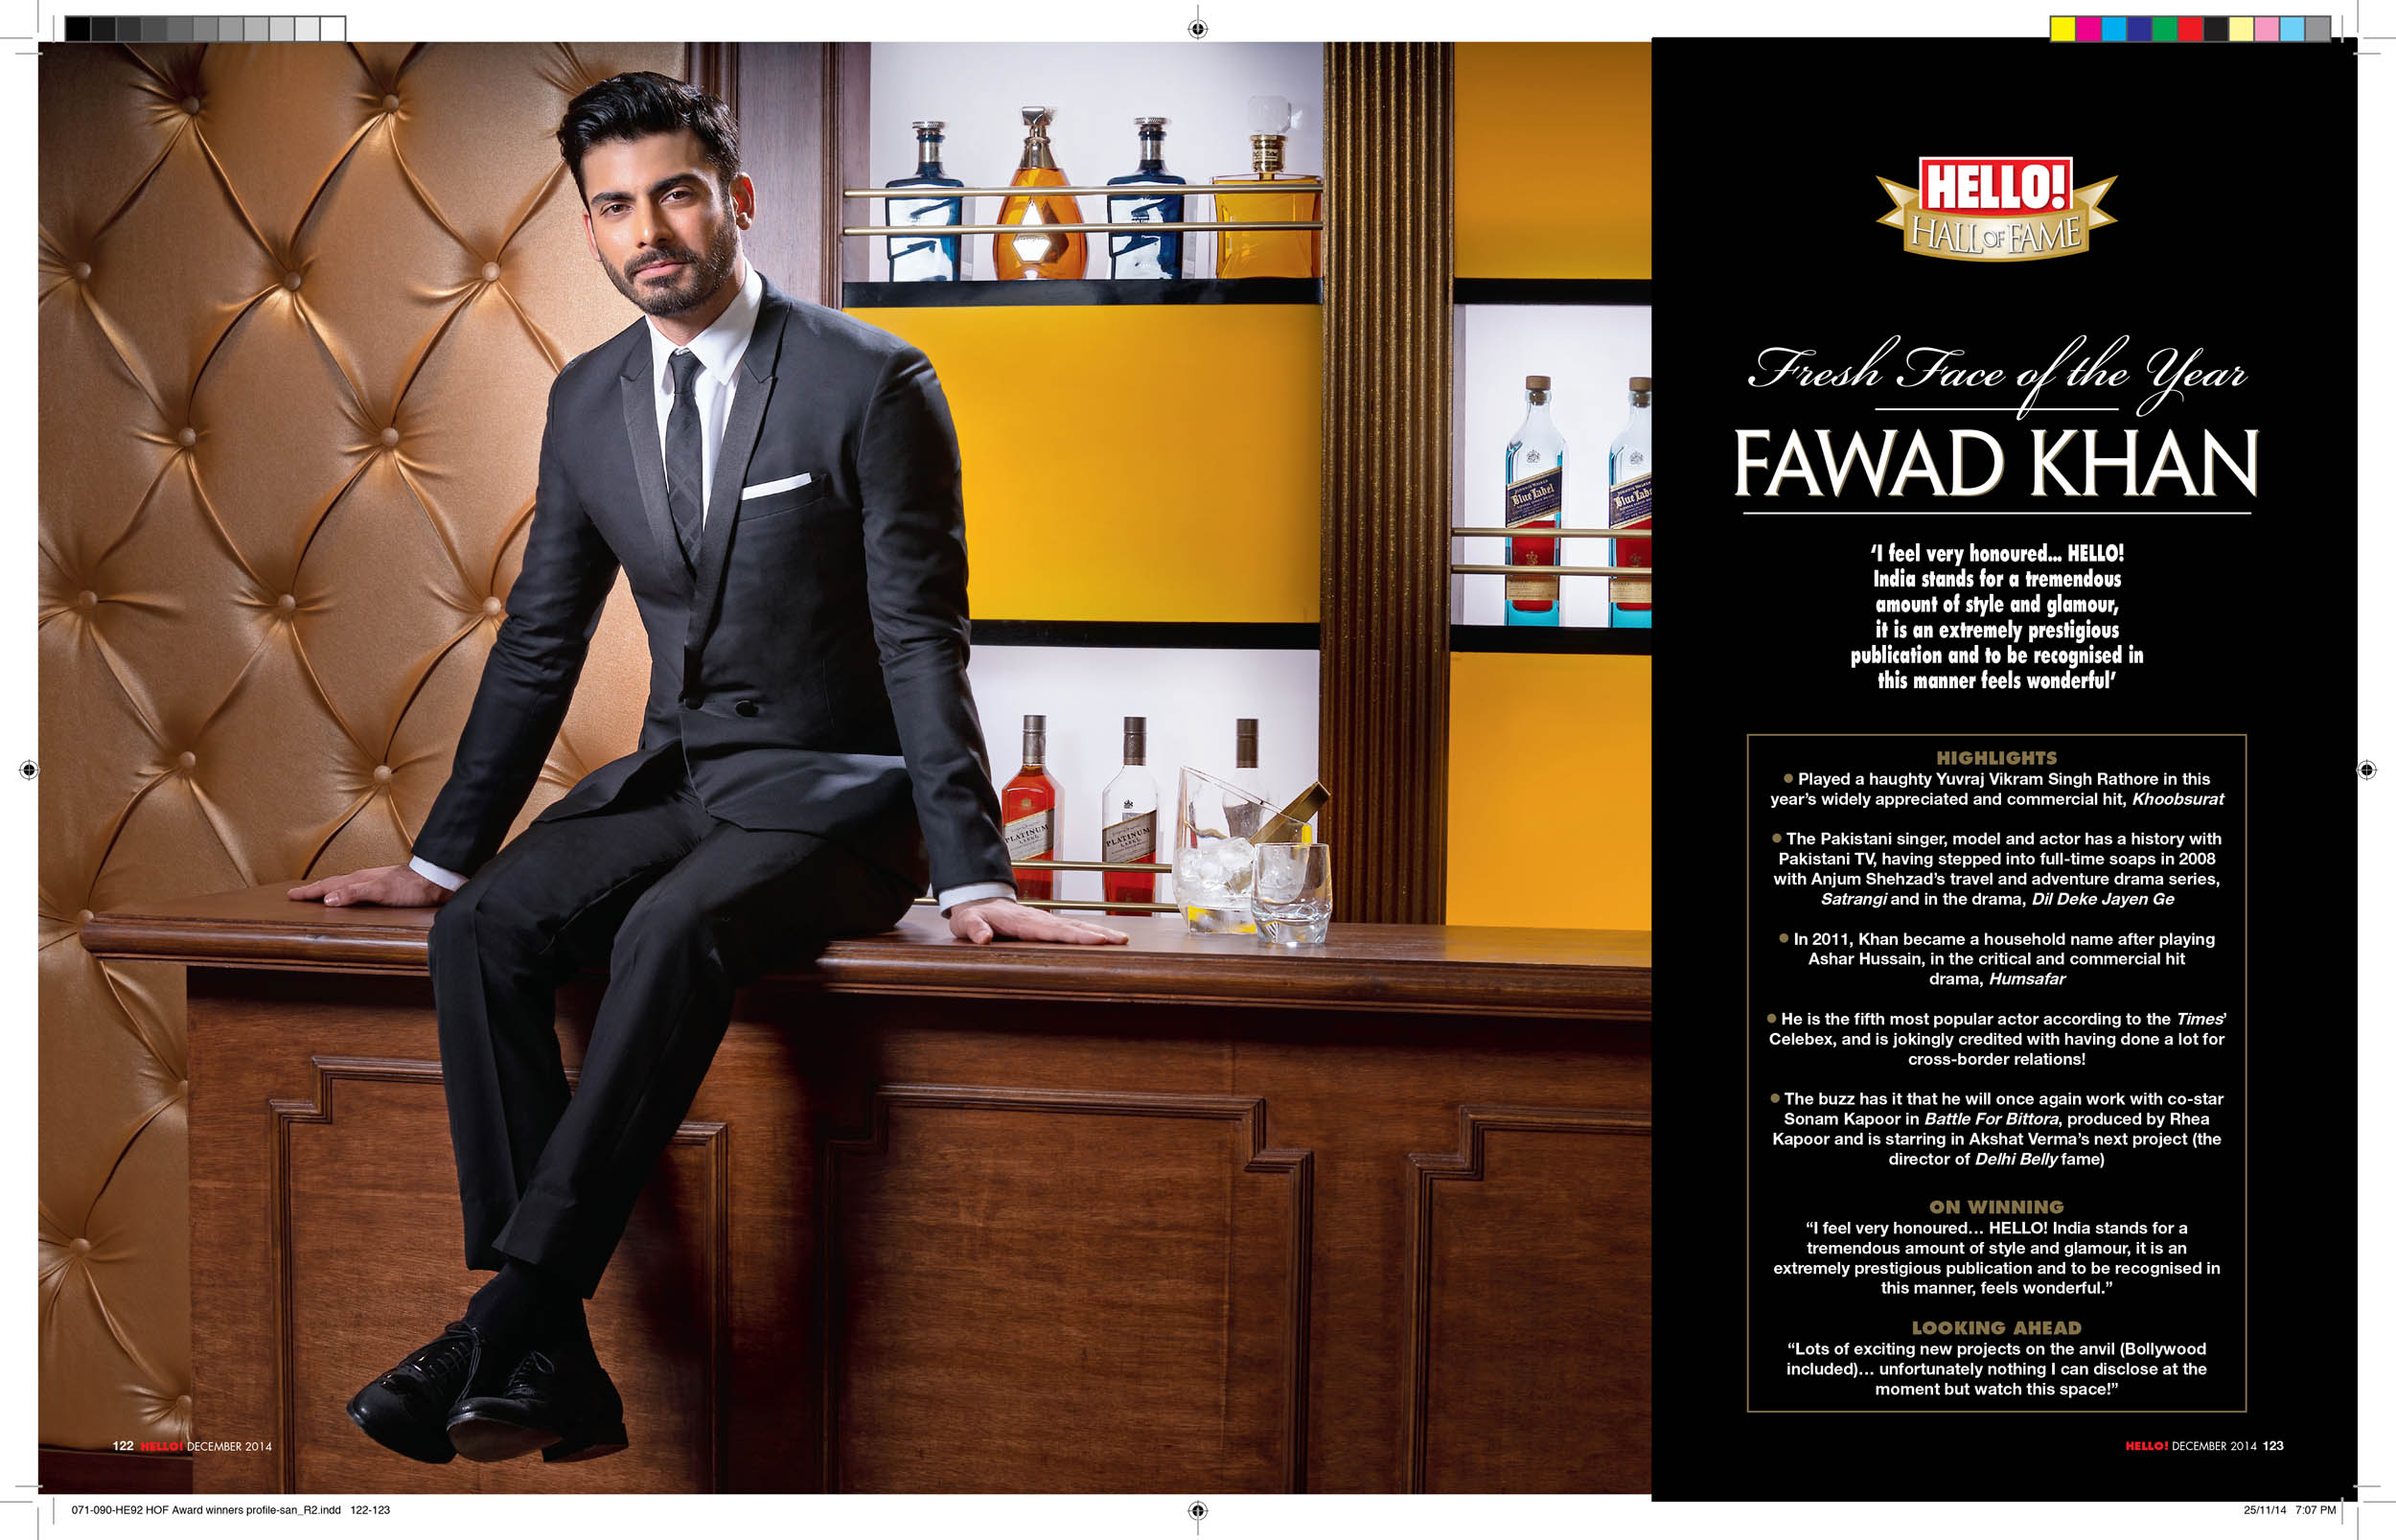 Best Bollywood Photographer in India Vikram Bawa, Actor Fawad Khan for Hello Magazine, Shooting with Star, Hello Awards,  Advertising Photographer, Best Published Photographer, Best Editorial Photographer, Best Fashion Photographer  Vikram Bawa in Mumbai, India